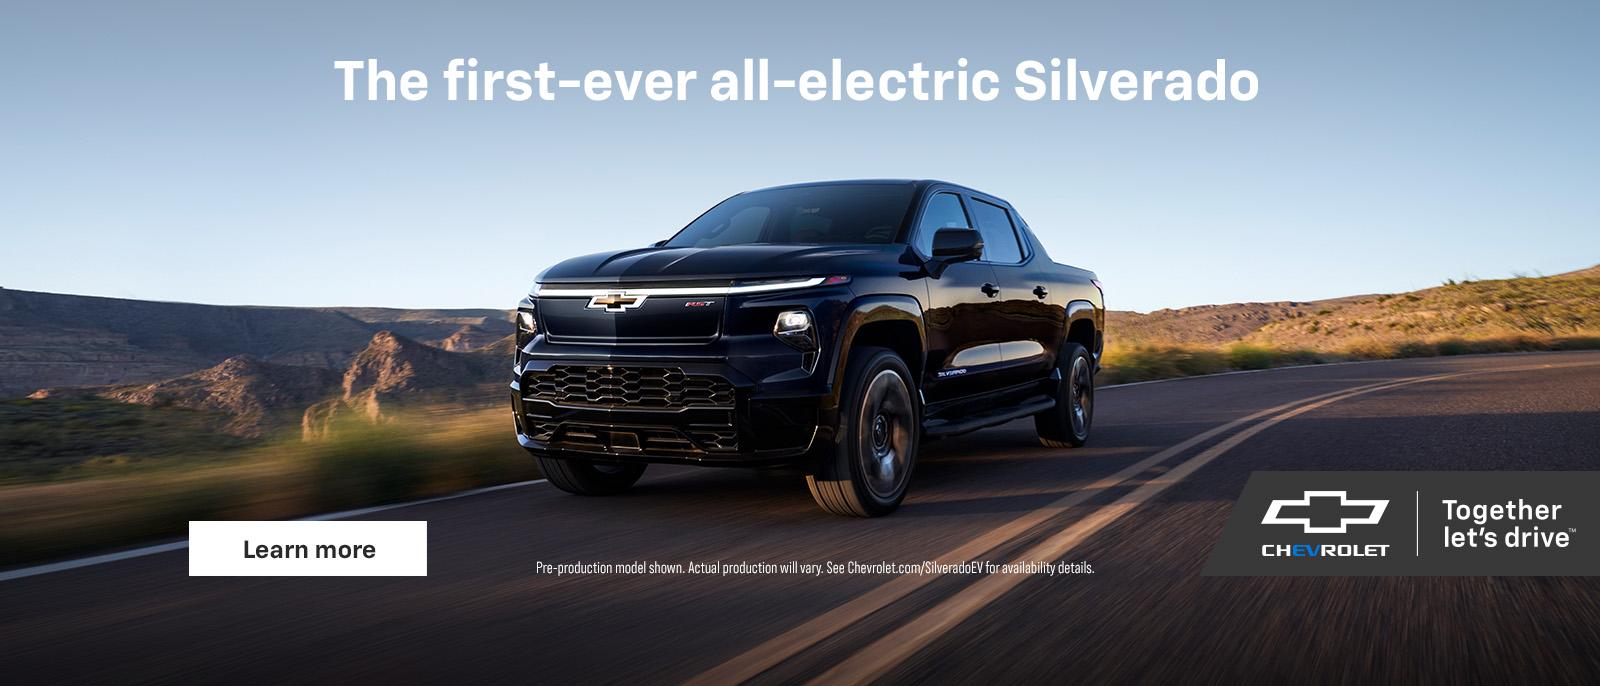 The first-ever all-electric Silverado. Pre-production model shown. Actual production will vary. See Chevrolet.com/SilveradoEV for availability details.